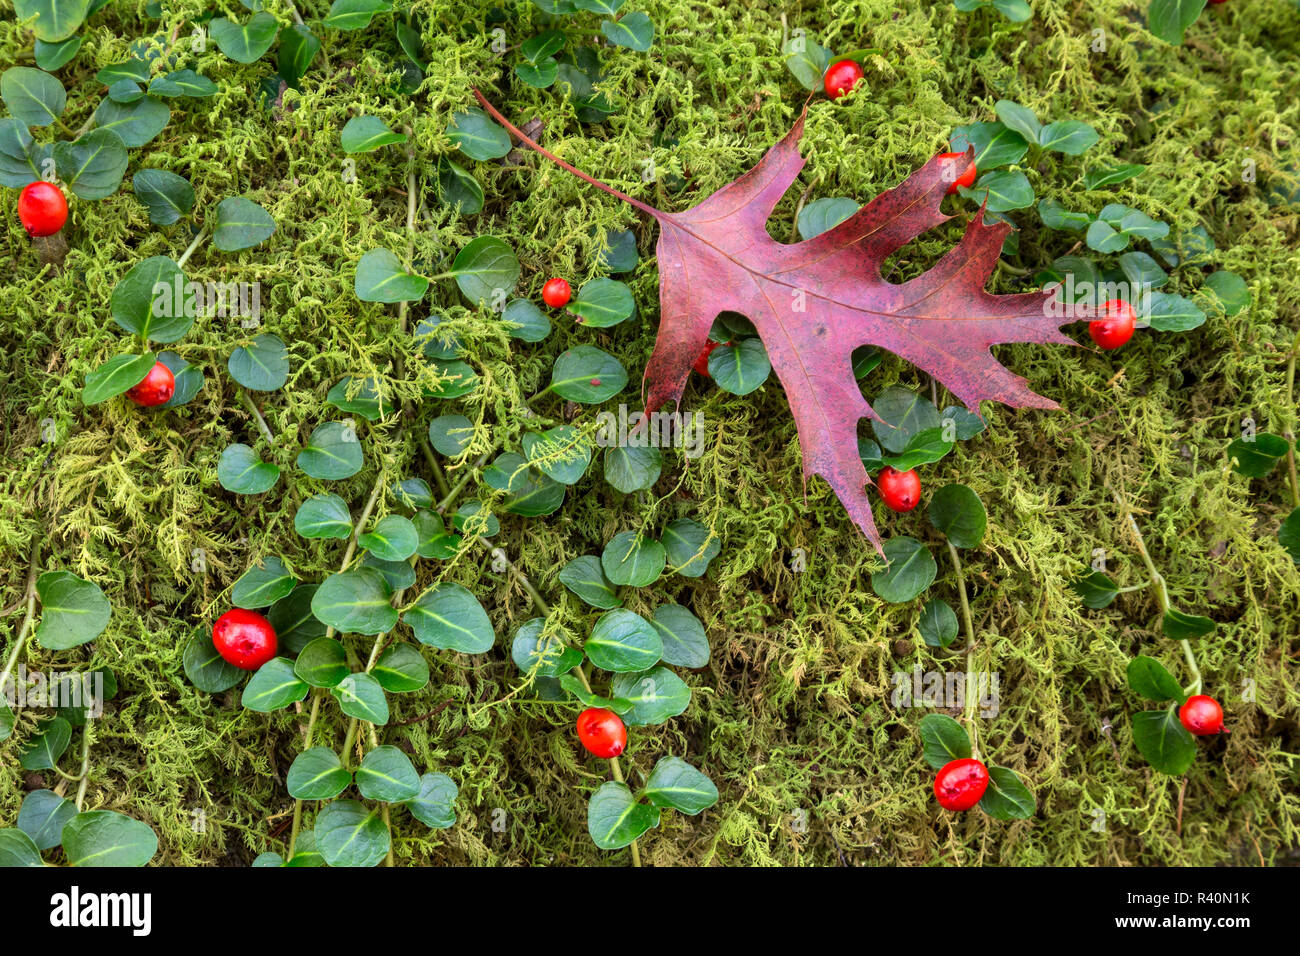 USA, Tennessee, Cherokee National Forest. Oak leaf and eastern teaberry plant. Stock Photo